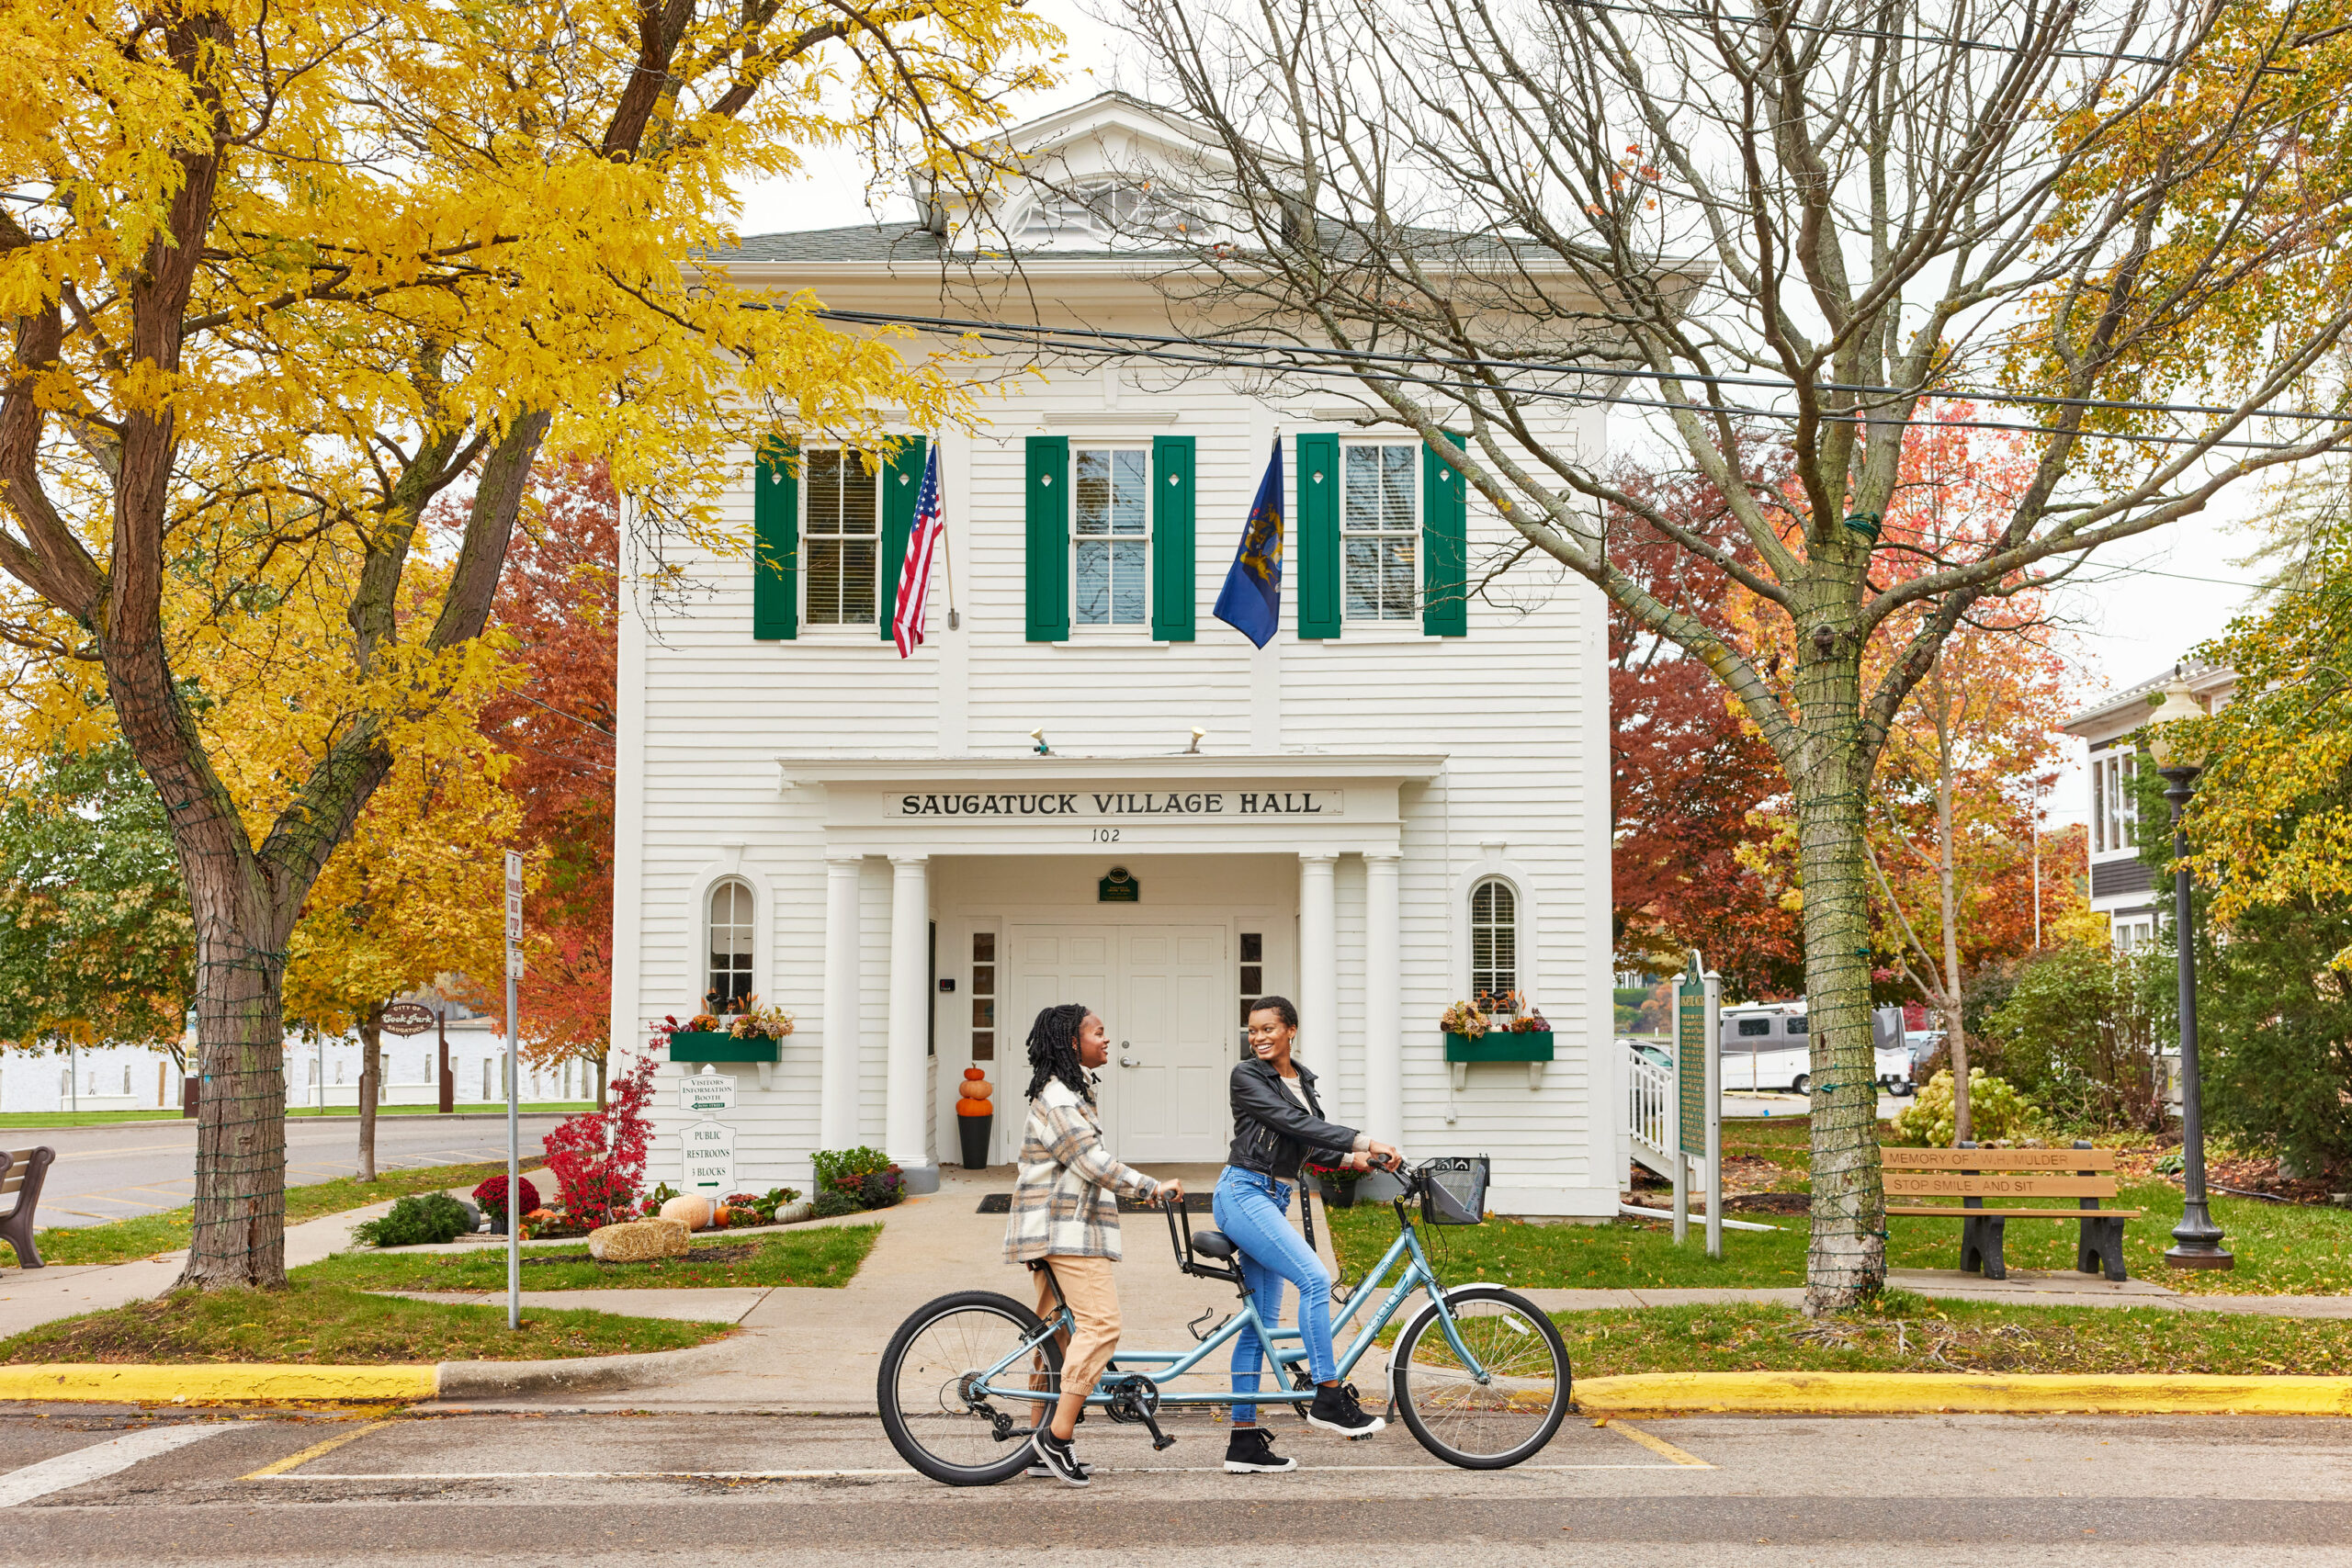 Two girls smile at each other as they ride bikes in front of the Saugatuck Village Hall. Golden fall colors and trees are in the background.